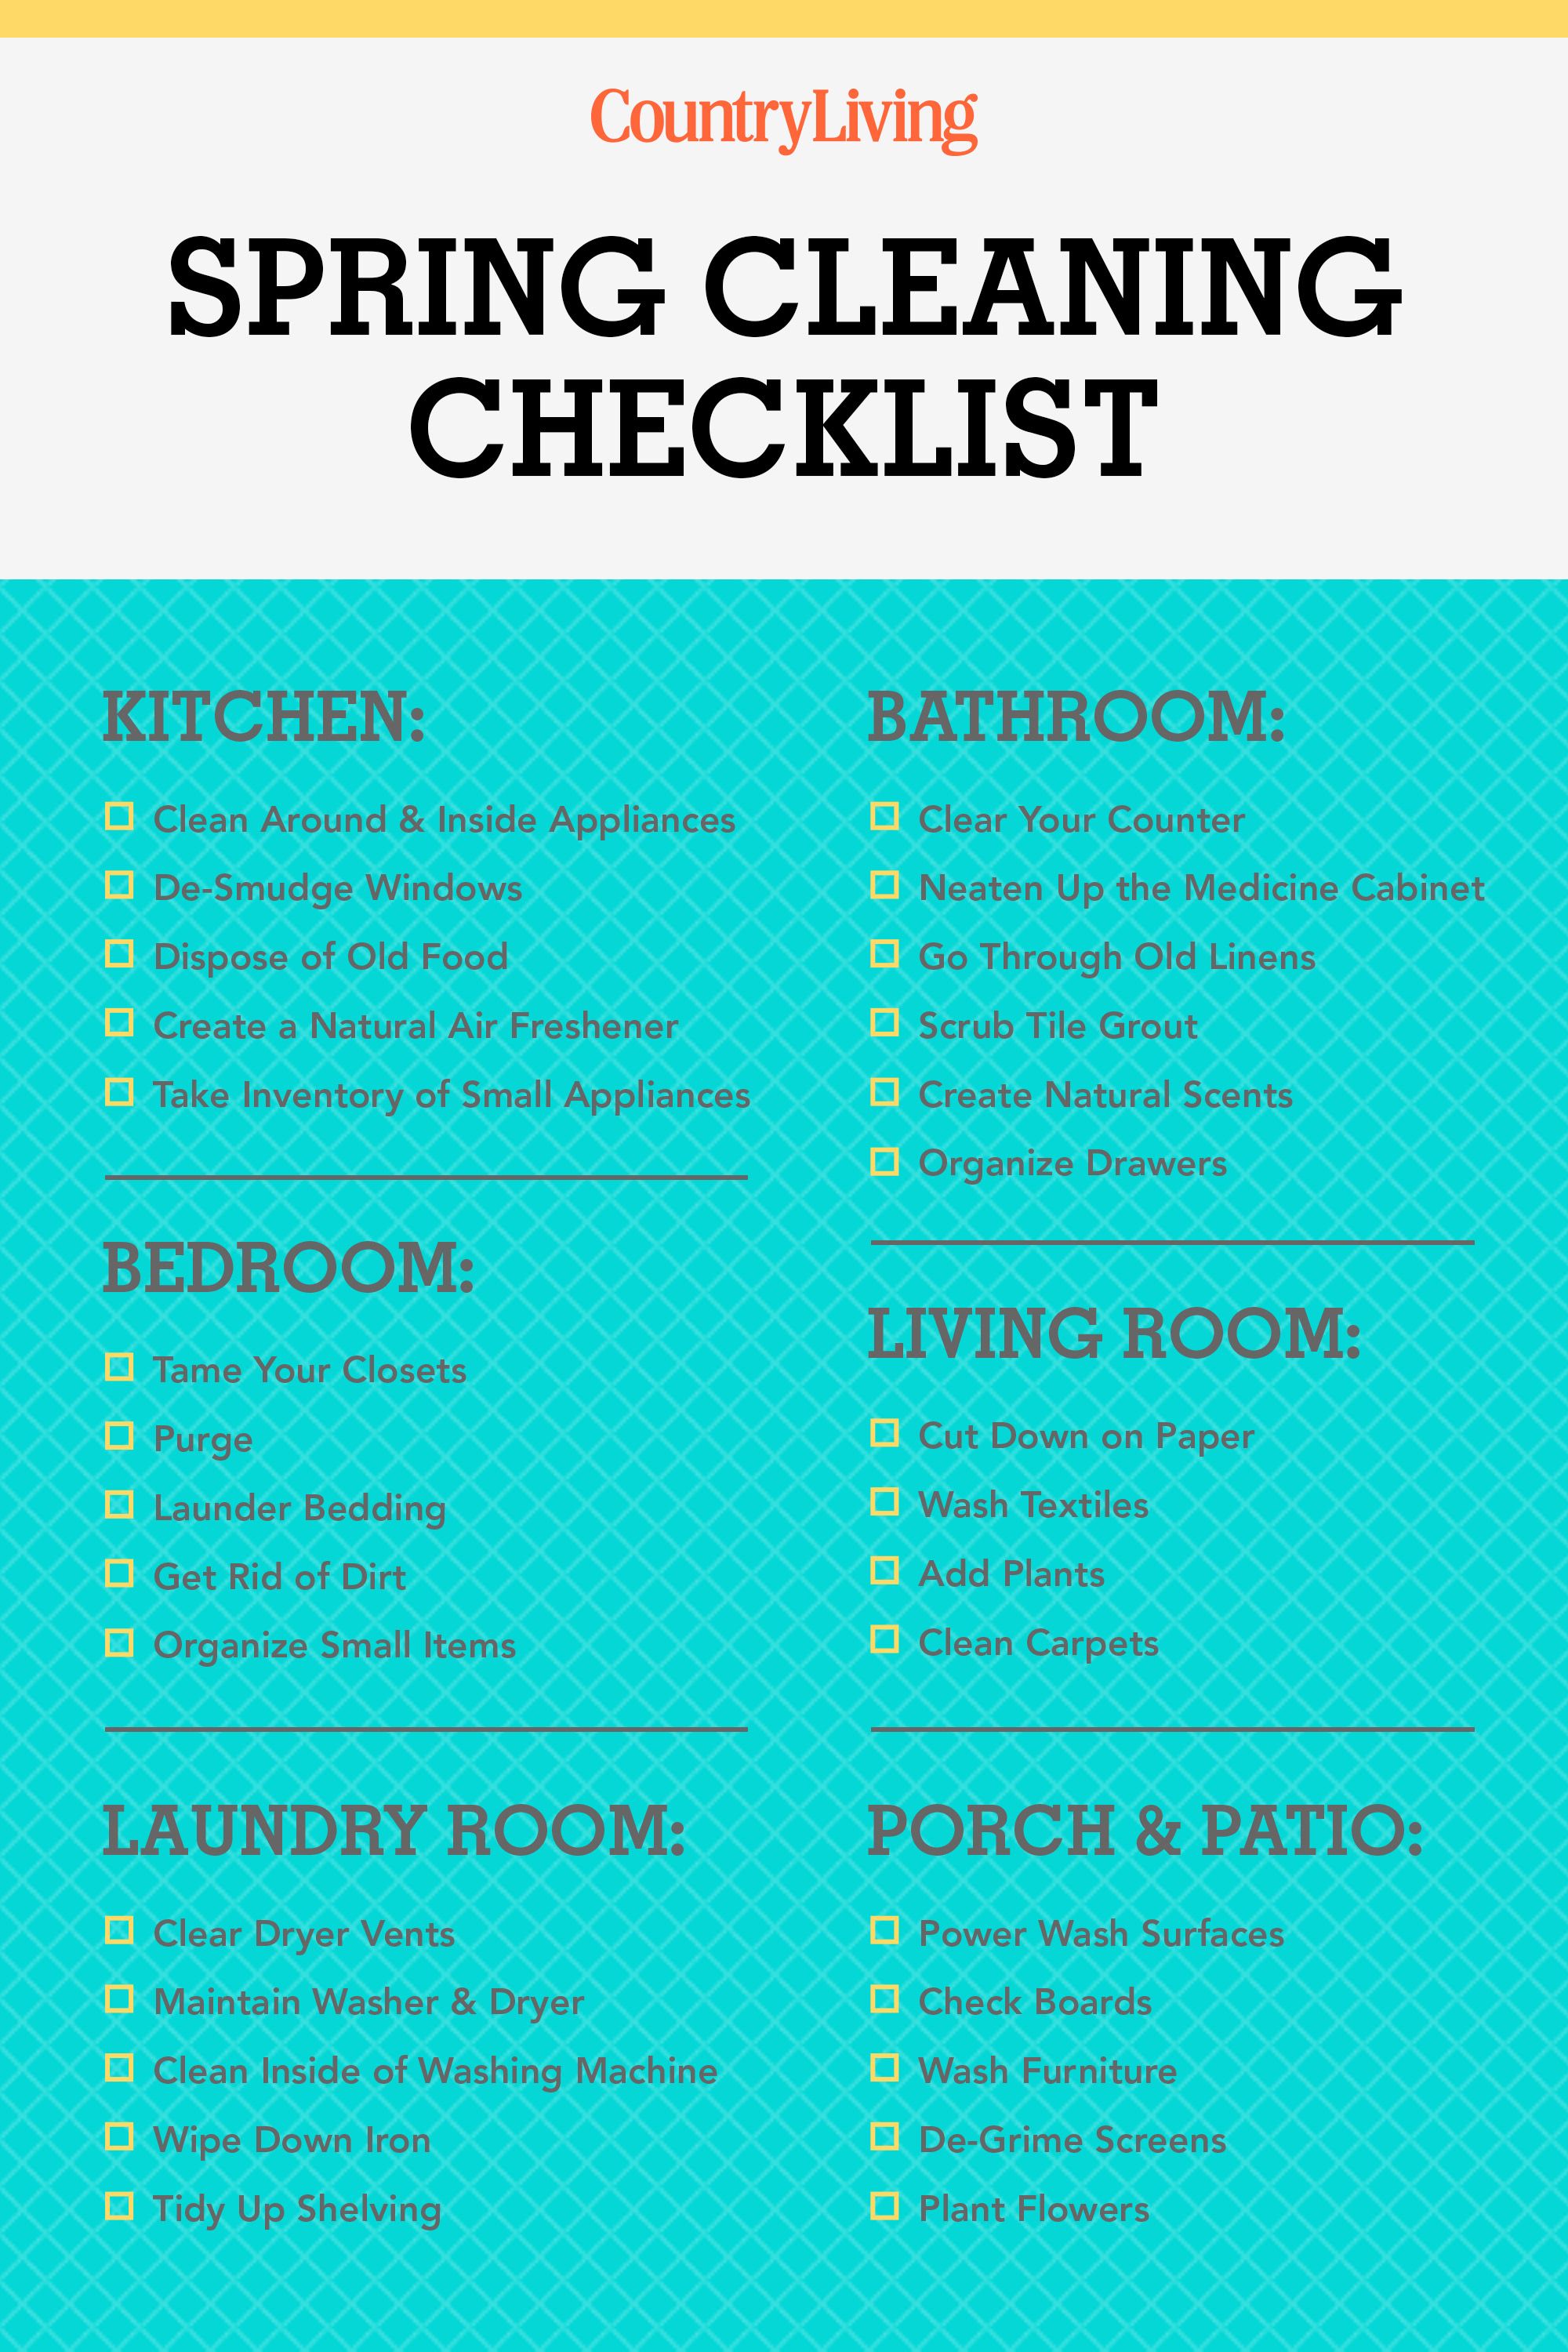 https://hips.hearstapps.com/countryliving/assets/16/08/1456420286-clx-springcleanchecklist-2.jpg